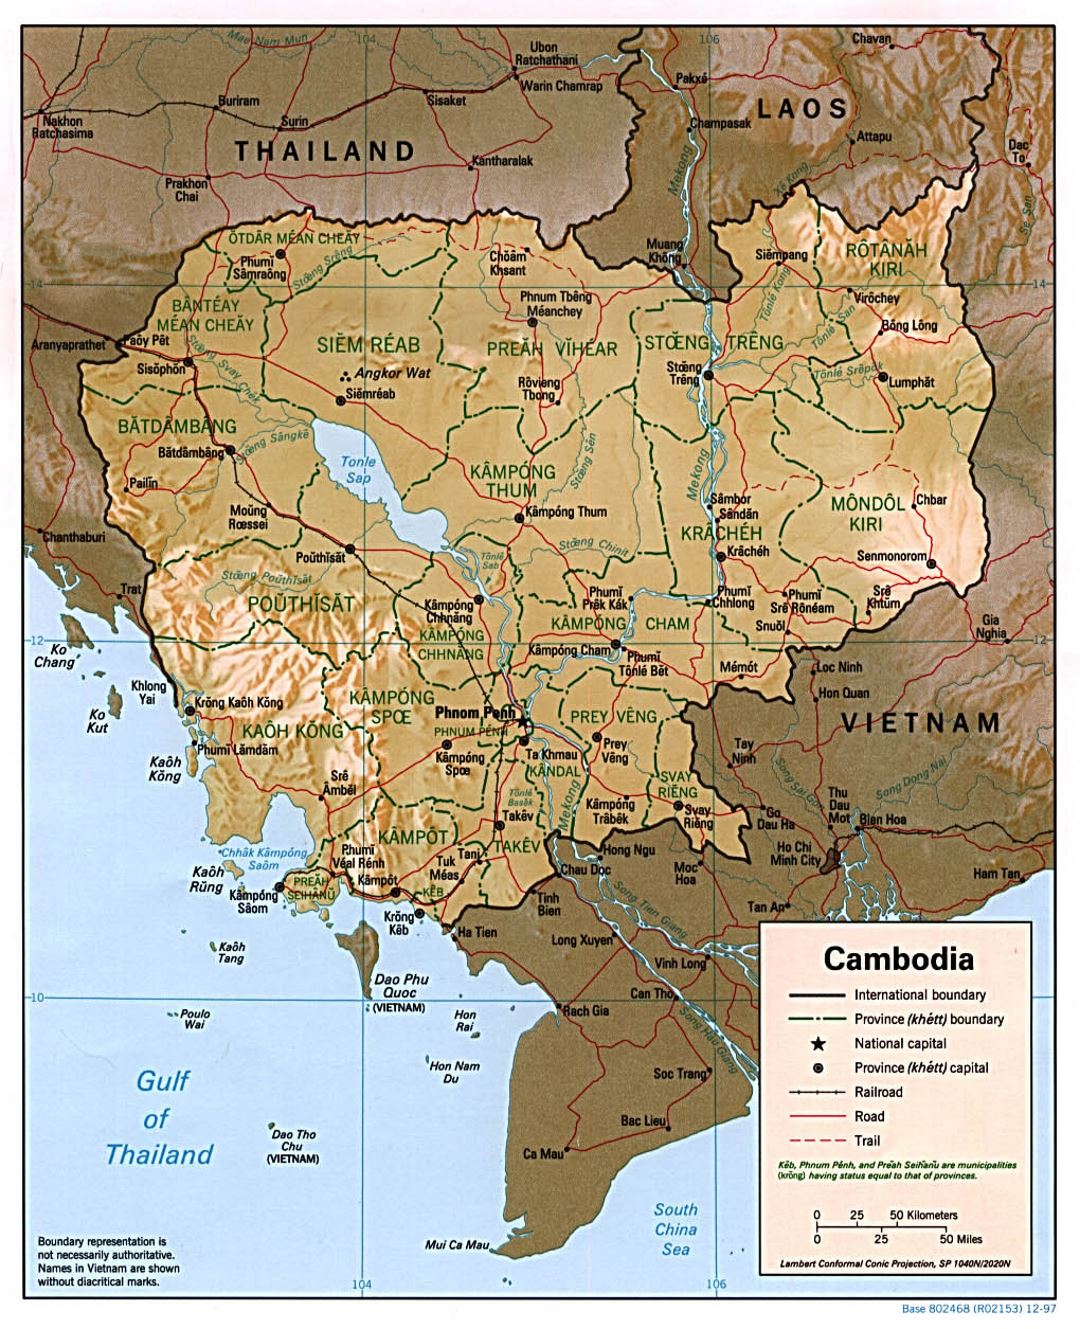 Detailed political and administrative map of Cambodia with relief, roads, railroads and major cities - 1997